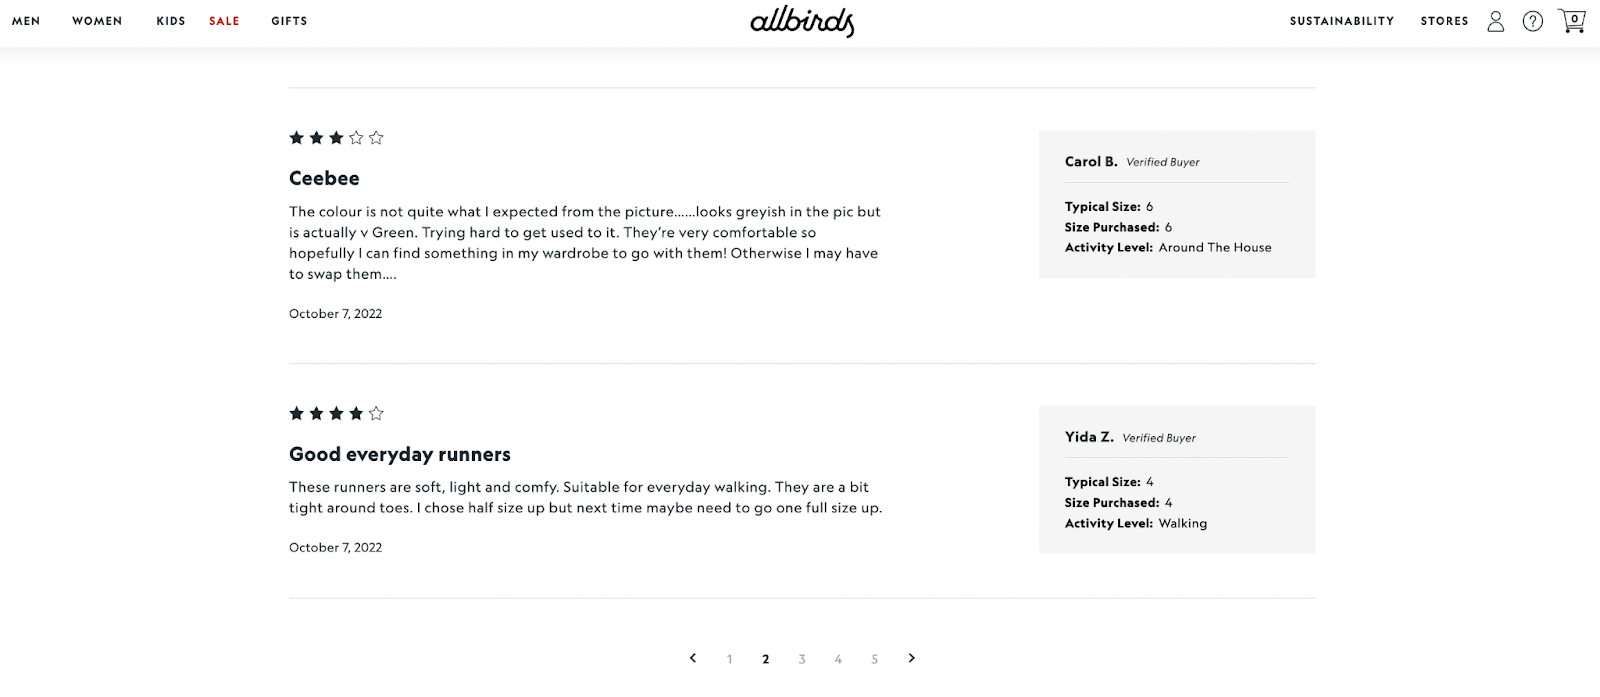 allbirds screenshot product page examples showing user reviews that can be filtered